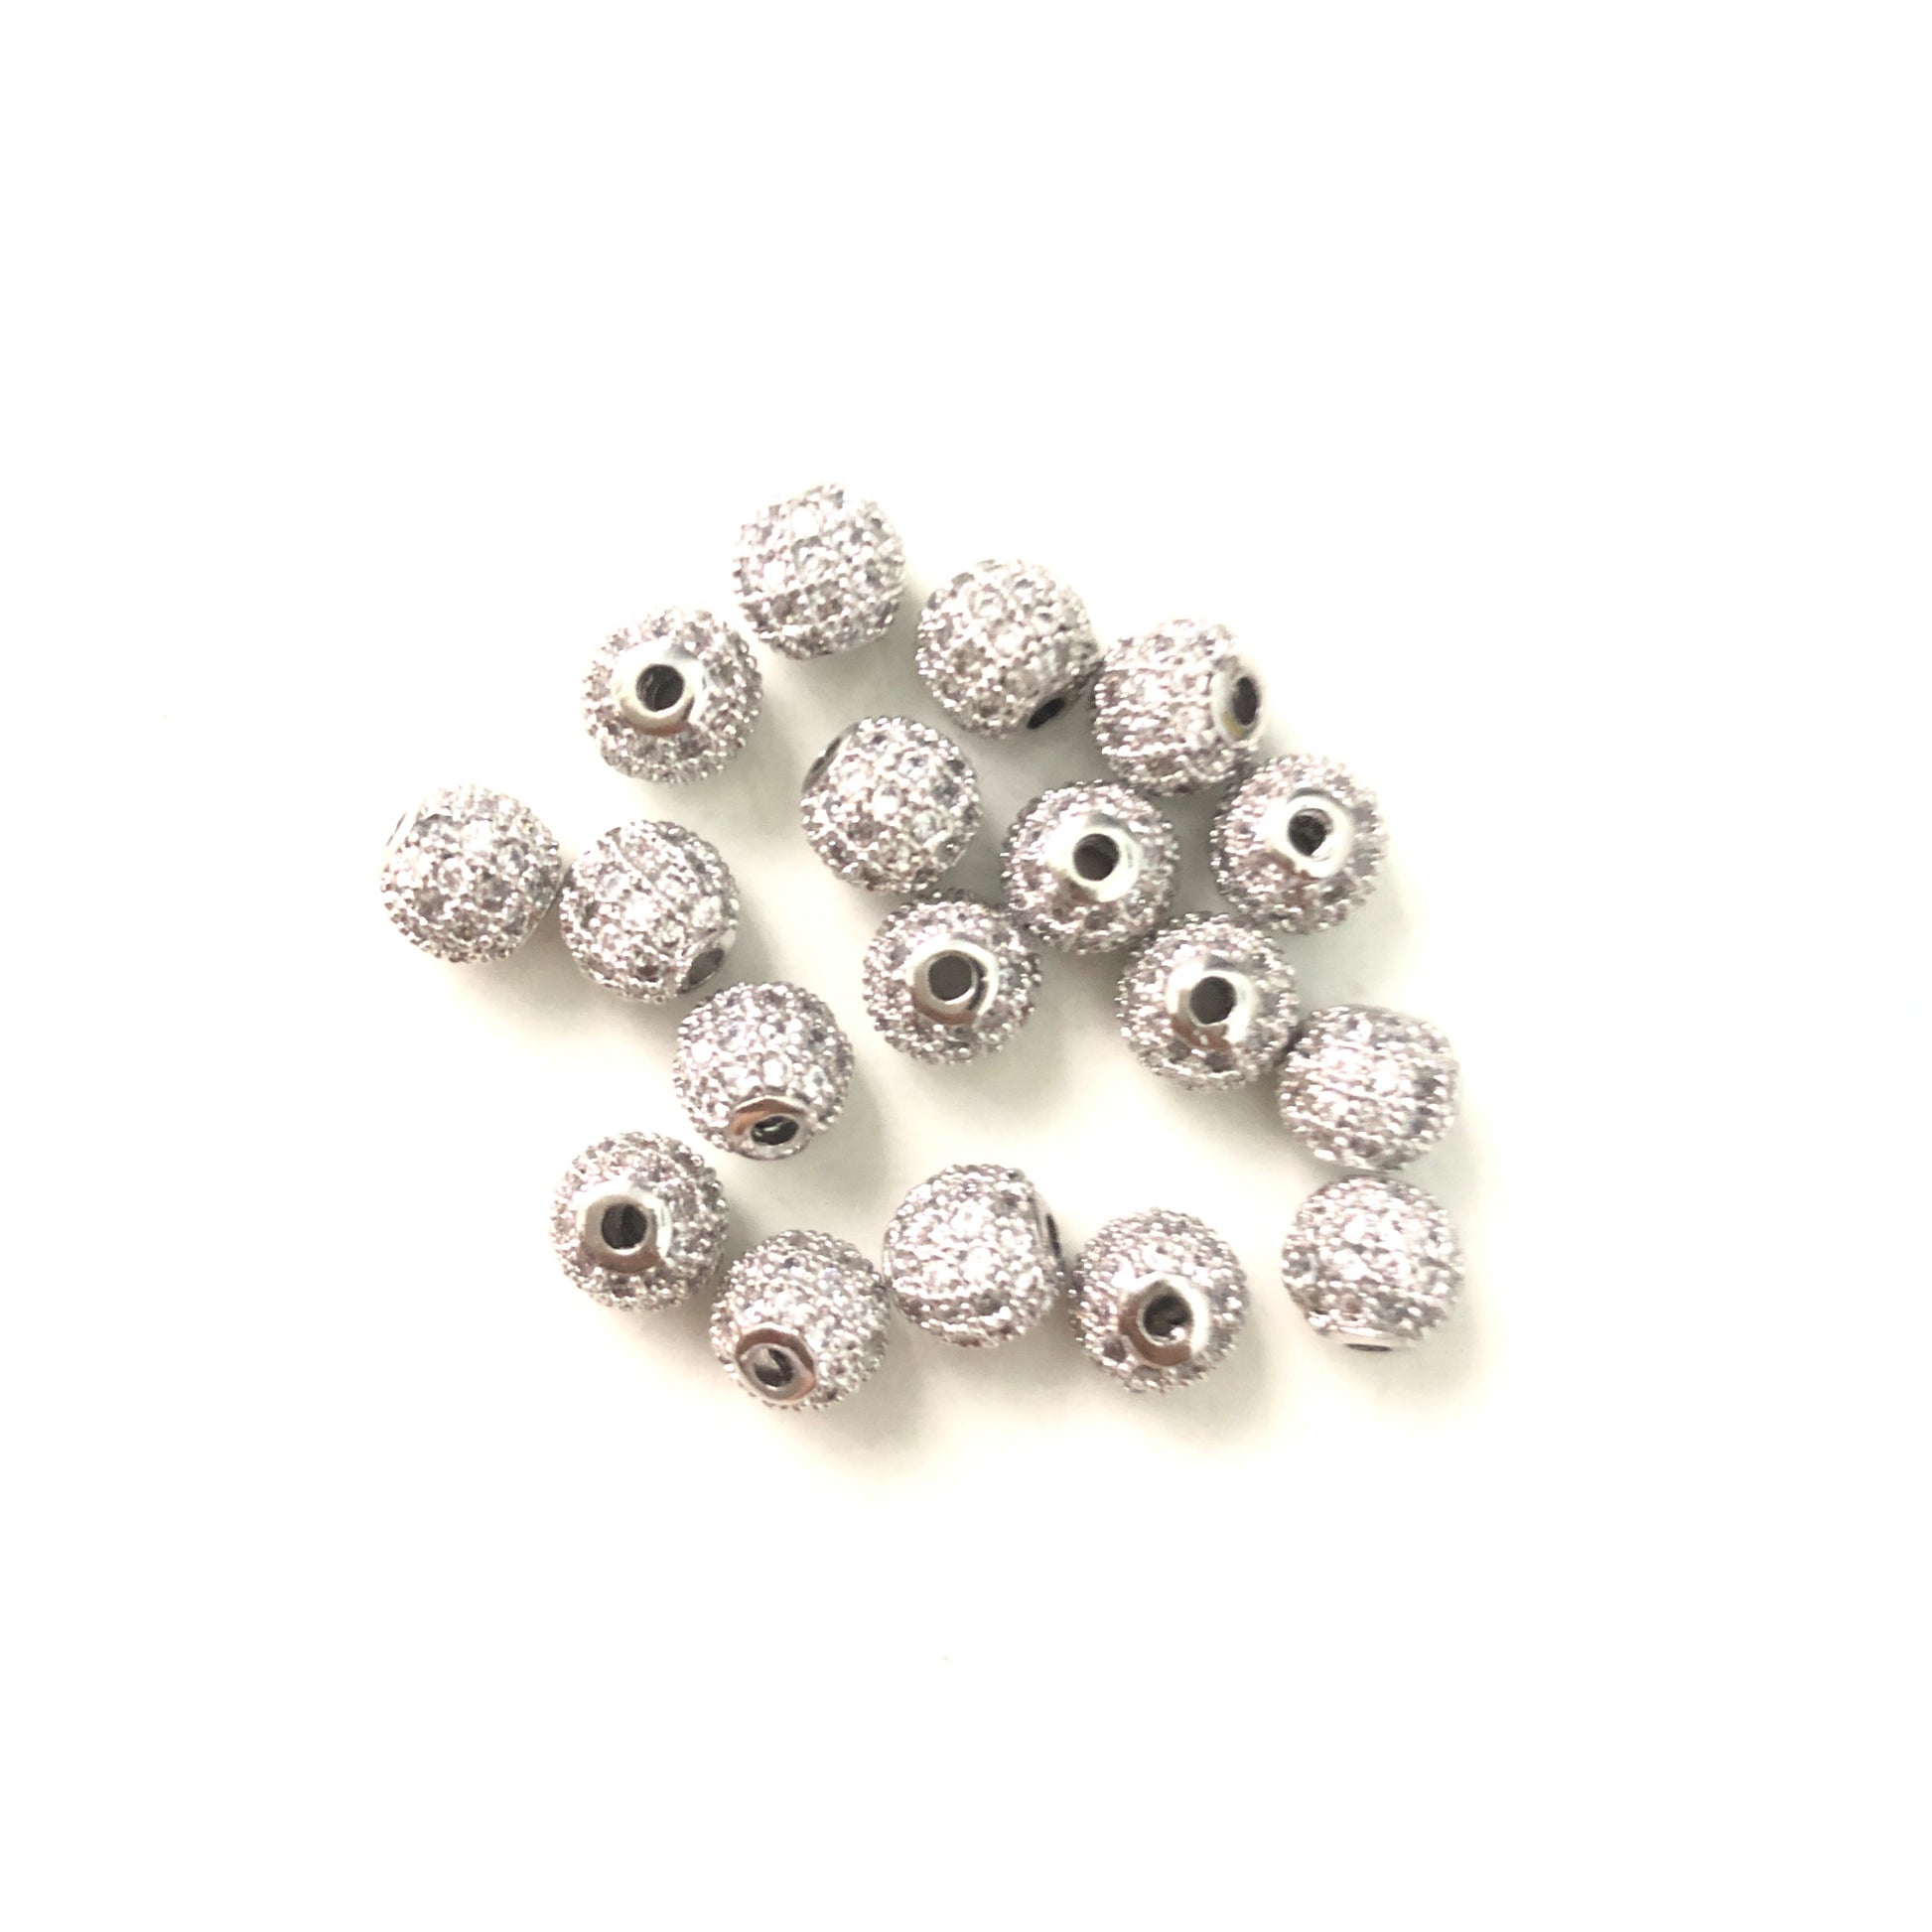 20pcs/lot 6mm Clear CZ Paved Ball Spacers Silver CZ Paved Spacers 6mm Beads Ball Beads Charms Beads Beyond